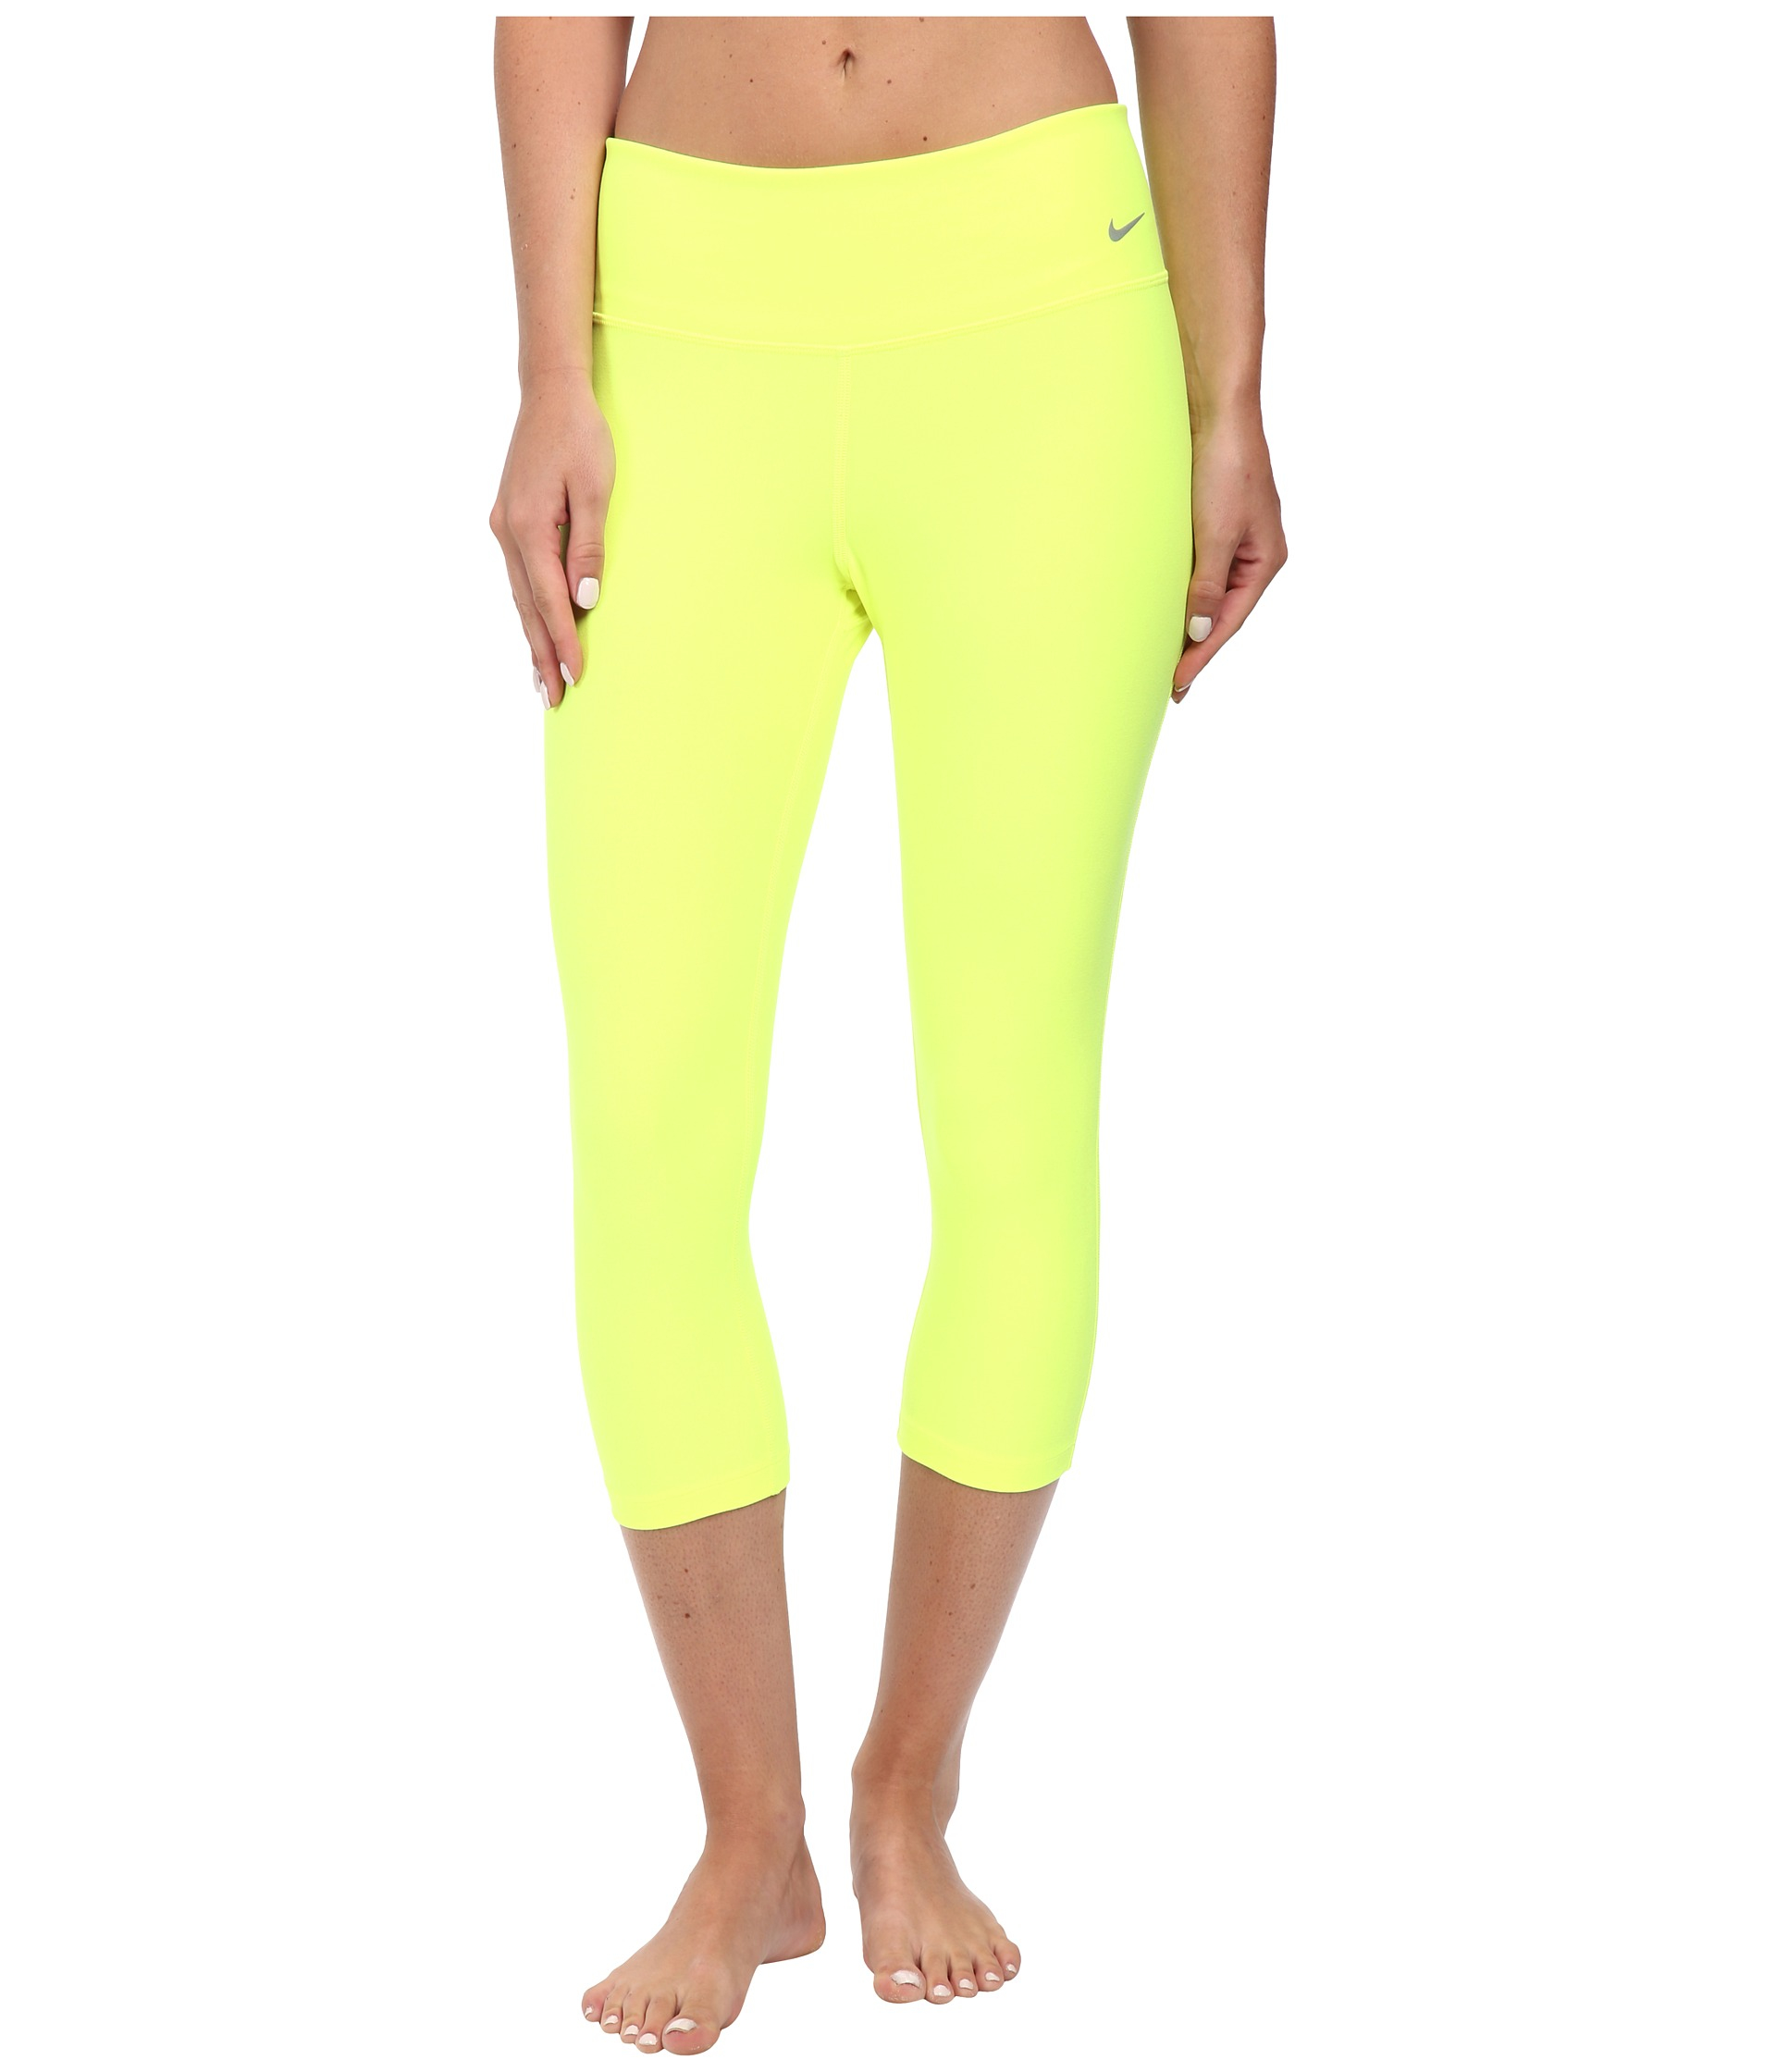 Lyst - Nike Pro Tights in Yellow